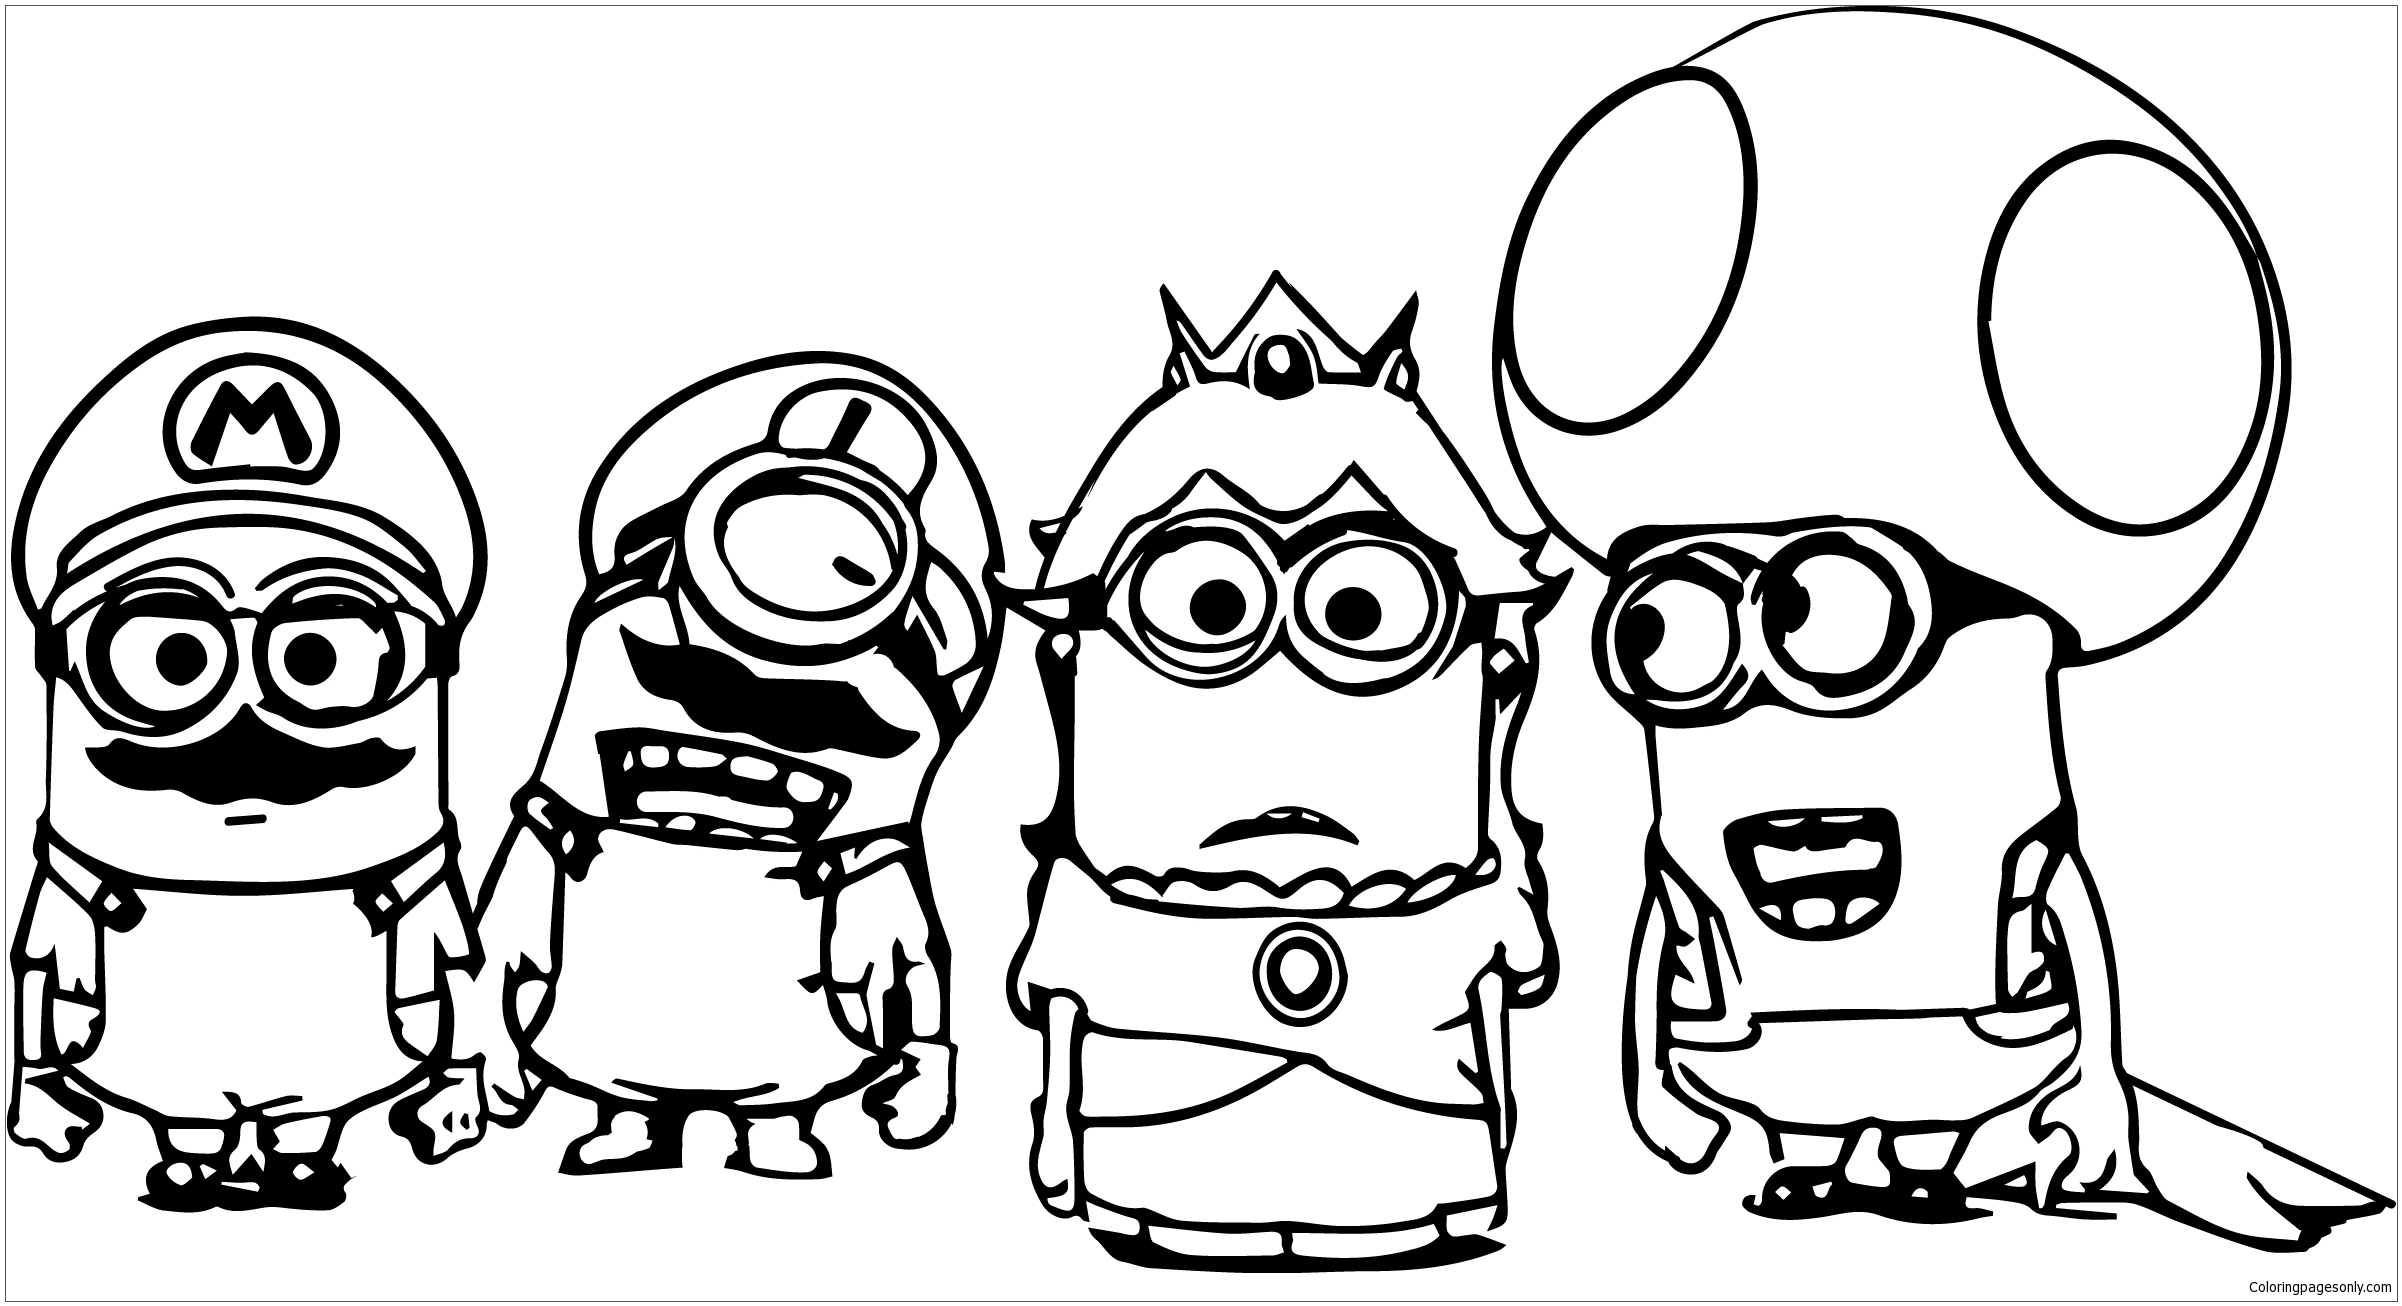 Super Mario Minions Coloring Page - Free Coloring Pages Online